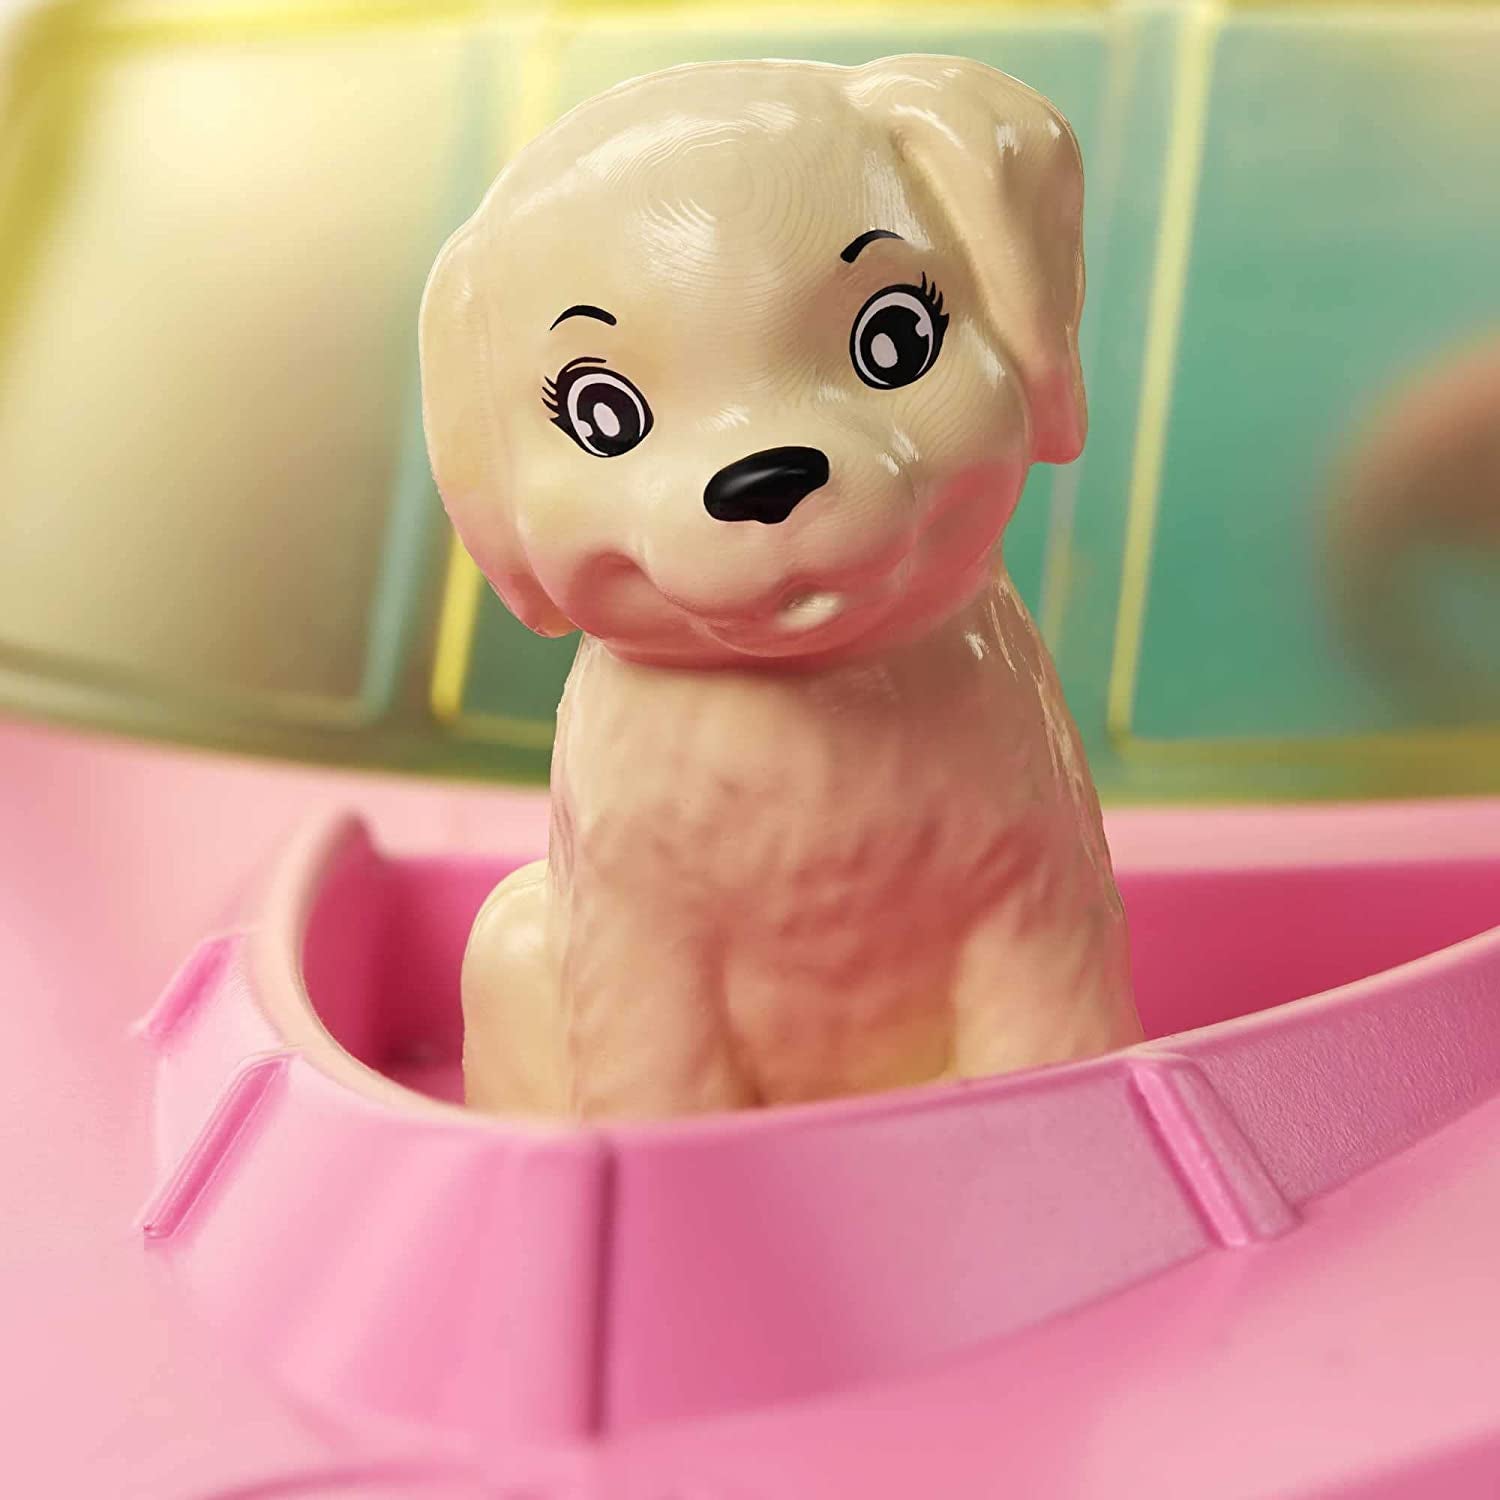 Barbie Toy Boat: Including Pet Puppy, Life Vest, and Beverage Accessories – Accommodates 3 Dolls, Waterproof Floating Design